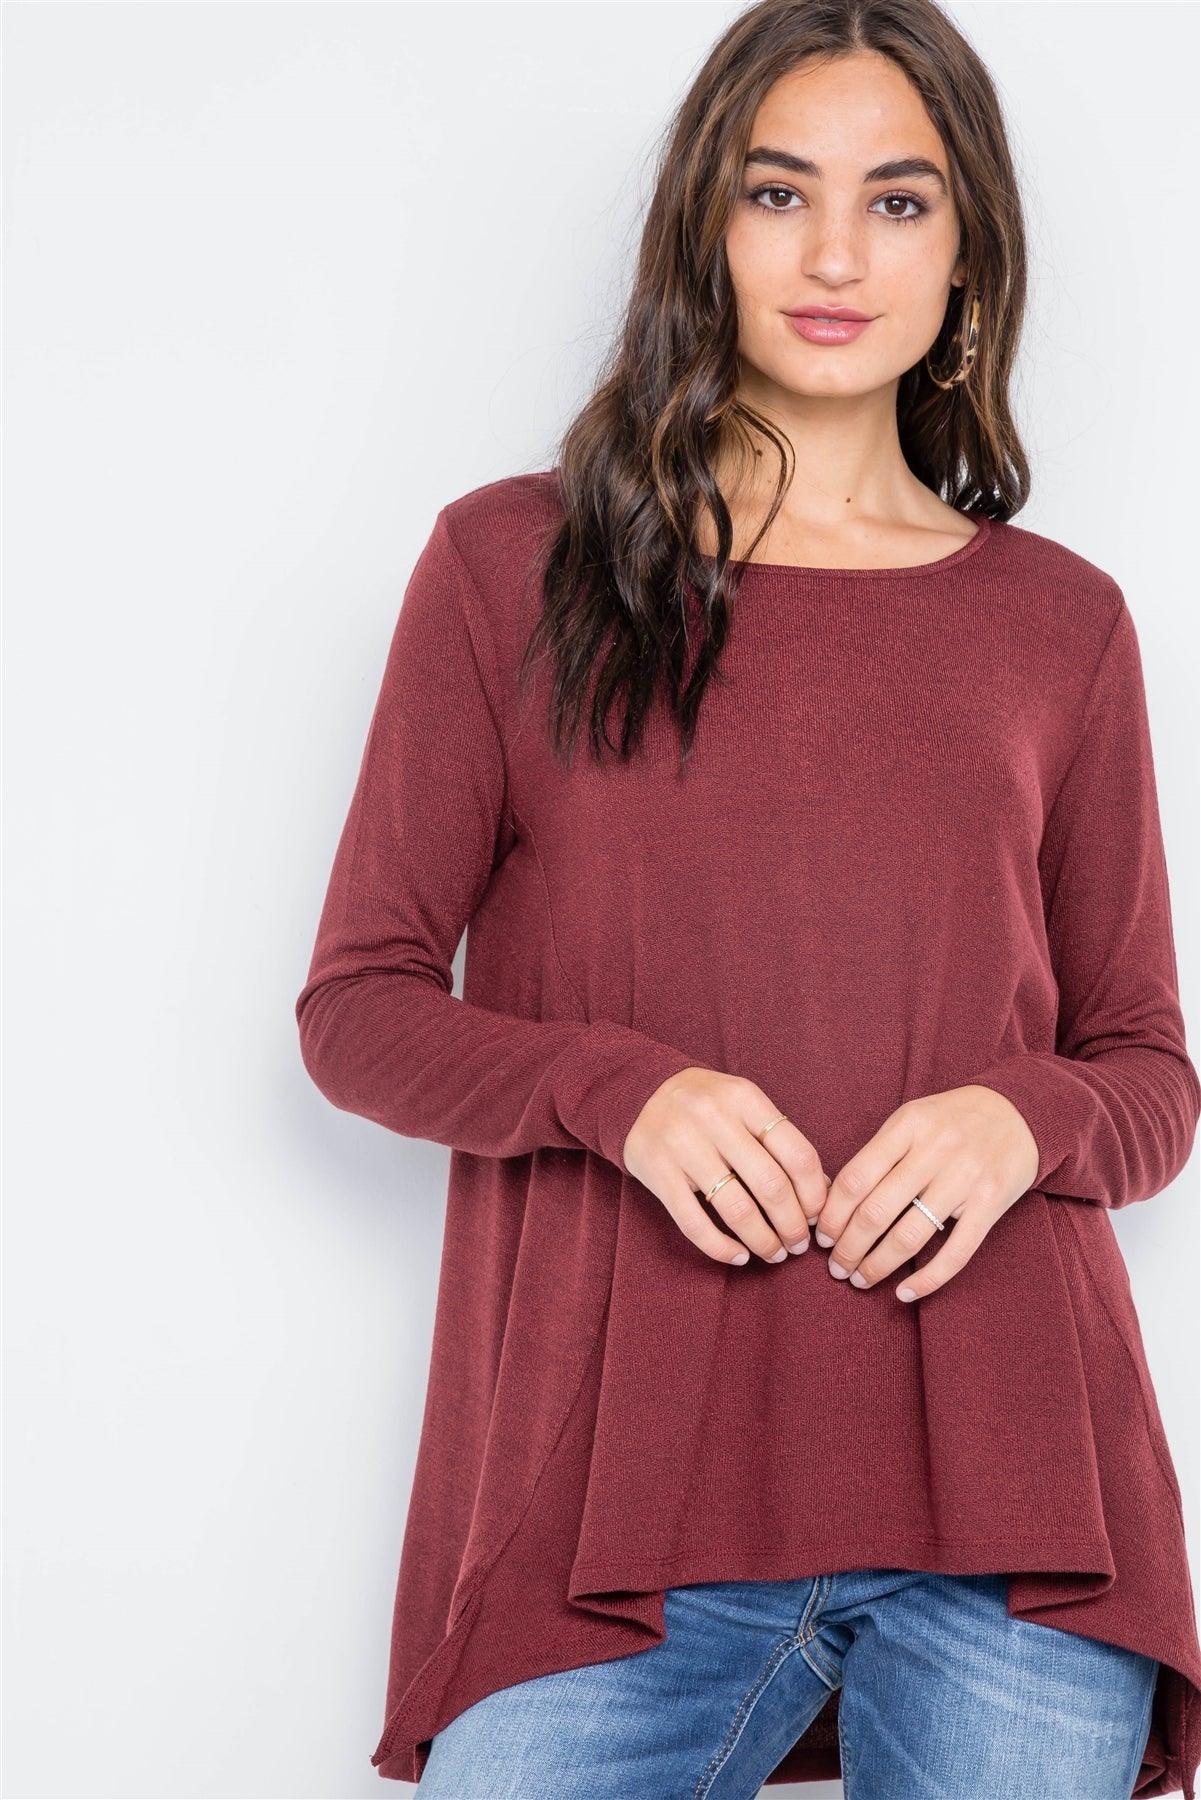 Wine Long Sleeve Loose Fit Solid Top /2-2-2